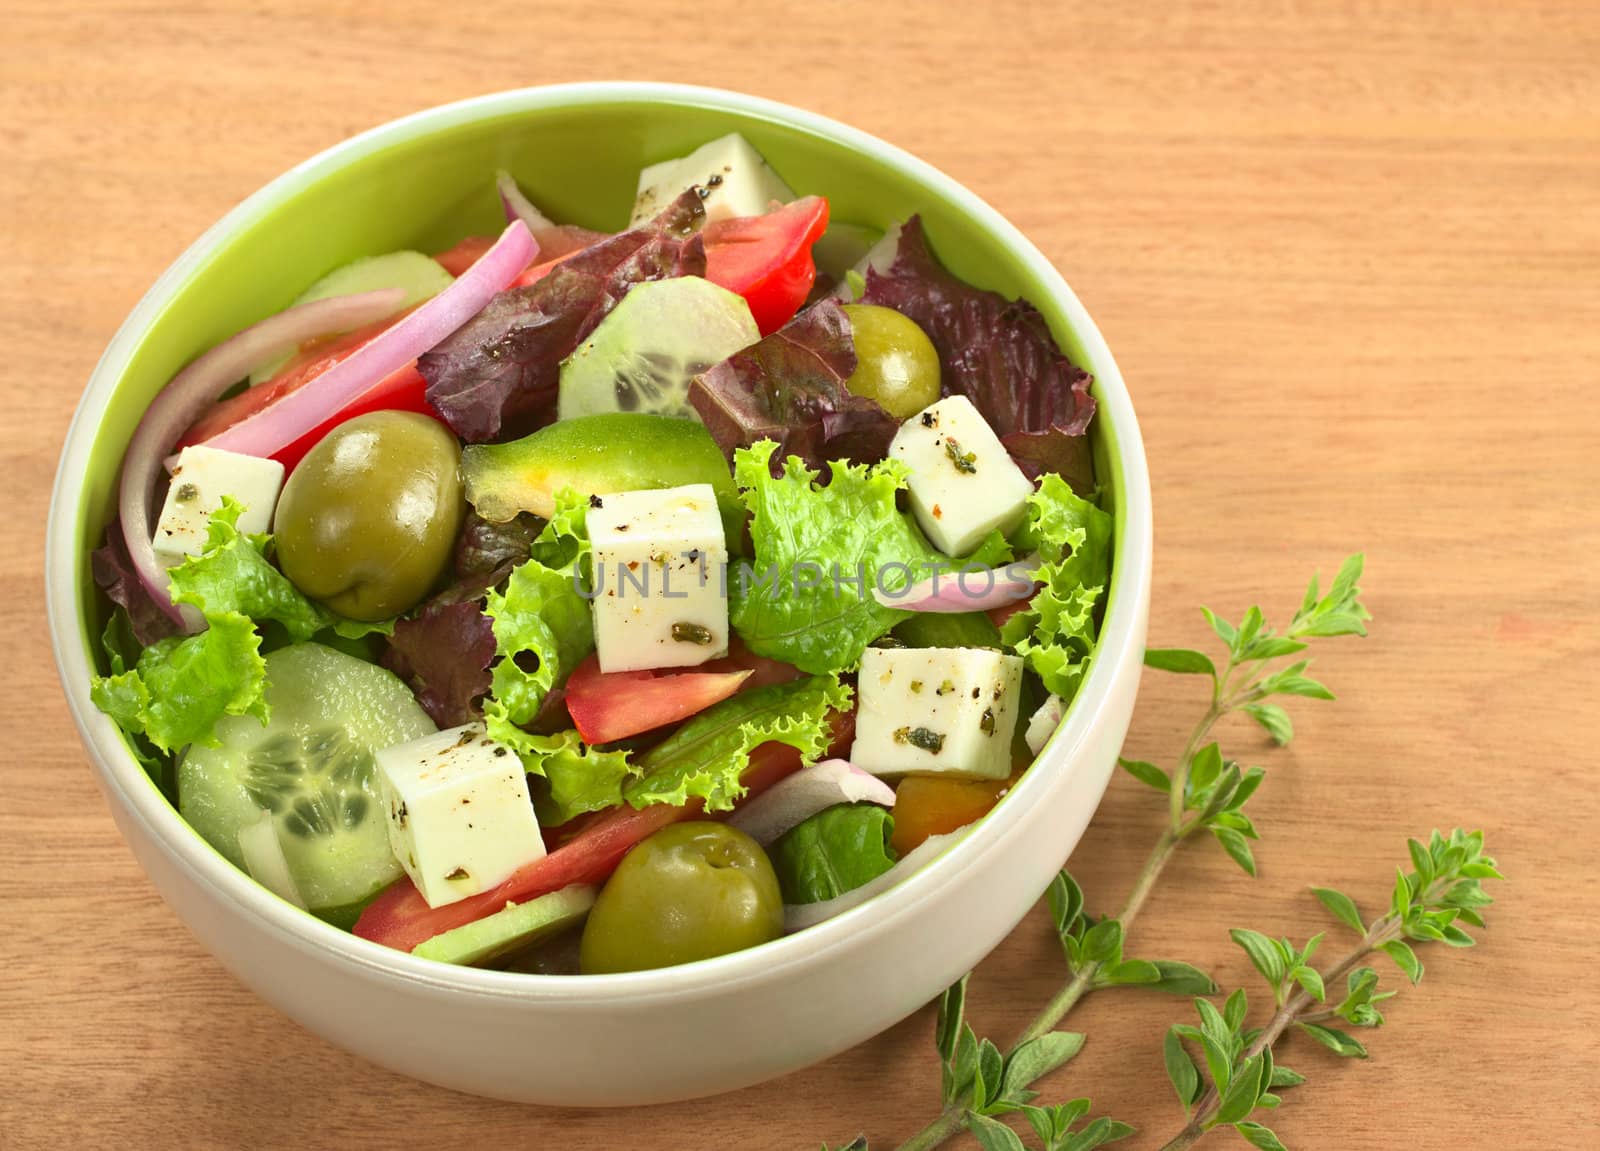 Greek salad out of cheese, green olives, tomato, green bell pepper, red onion, cucumber and lettuce with fresh oregano beside the bowl on wood (Selective Focus, Focus from the front to the middle of the bowl) 